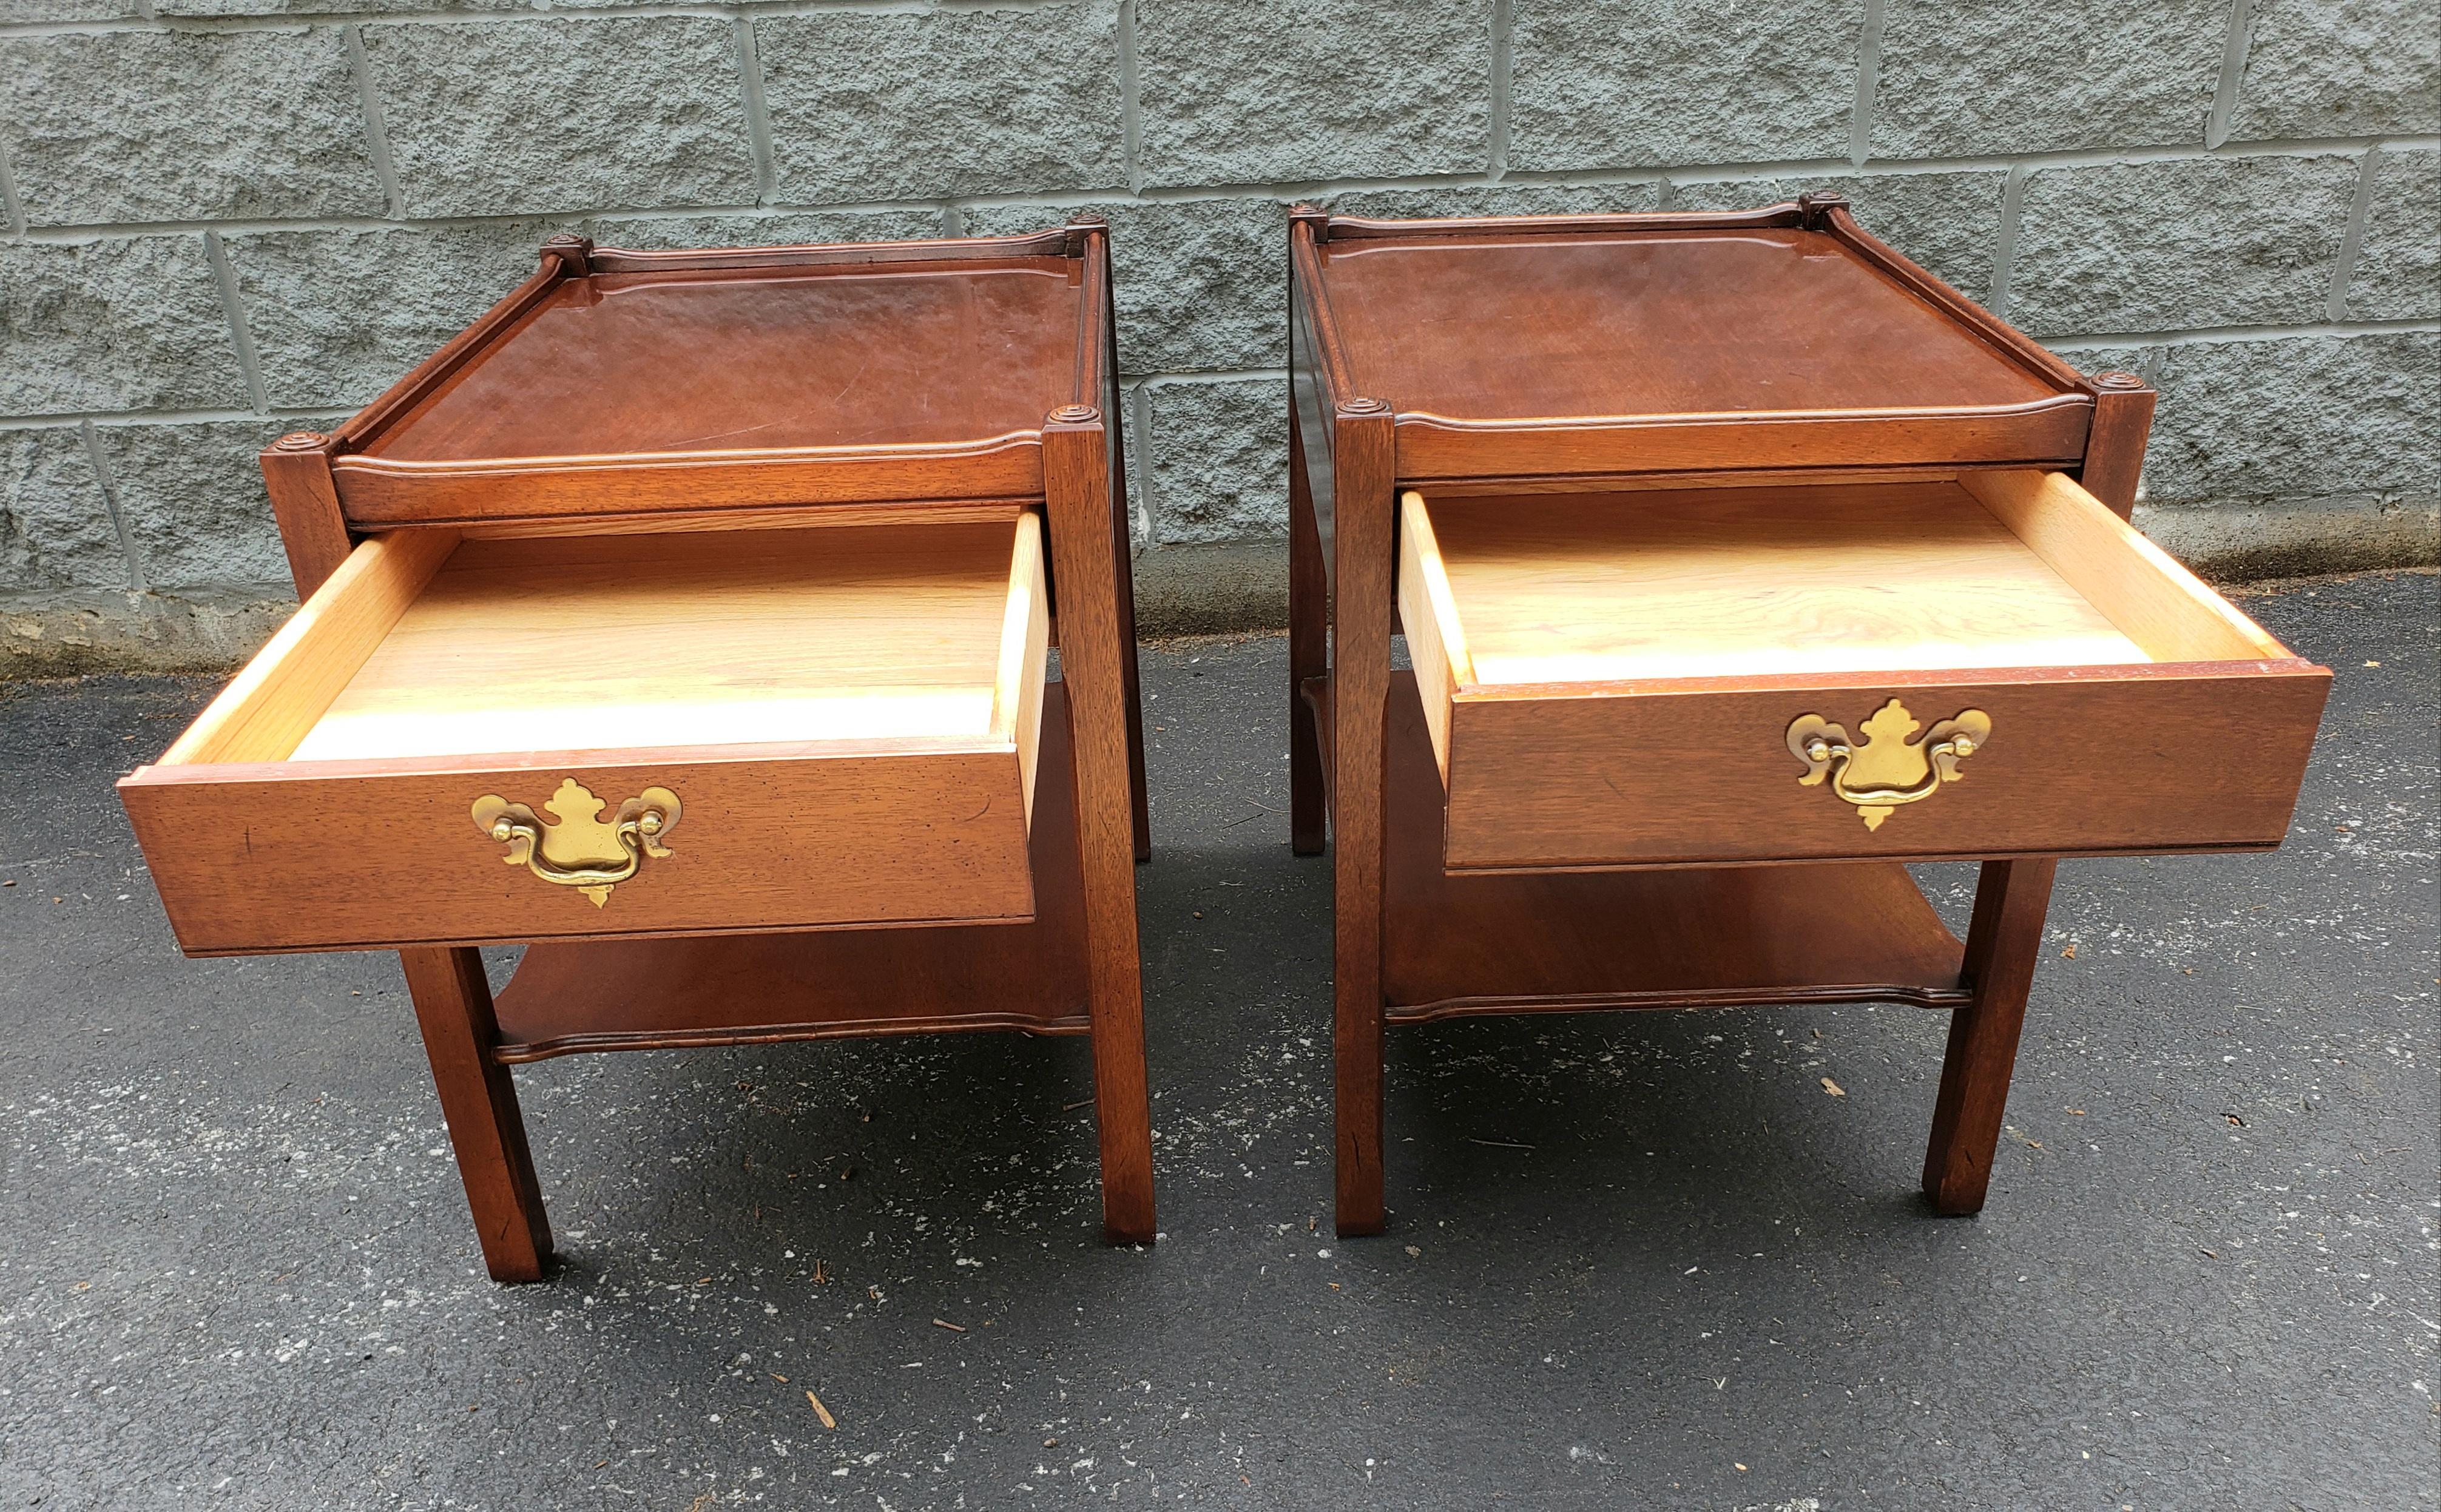 Hickory Chair Co. James River Collection Solid Mahogany Side Tables, a Pair In Good Condition For Sale In Germantown, MD